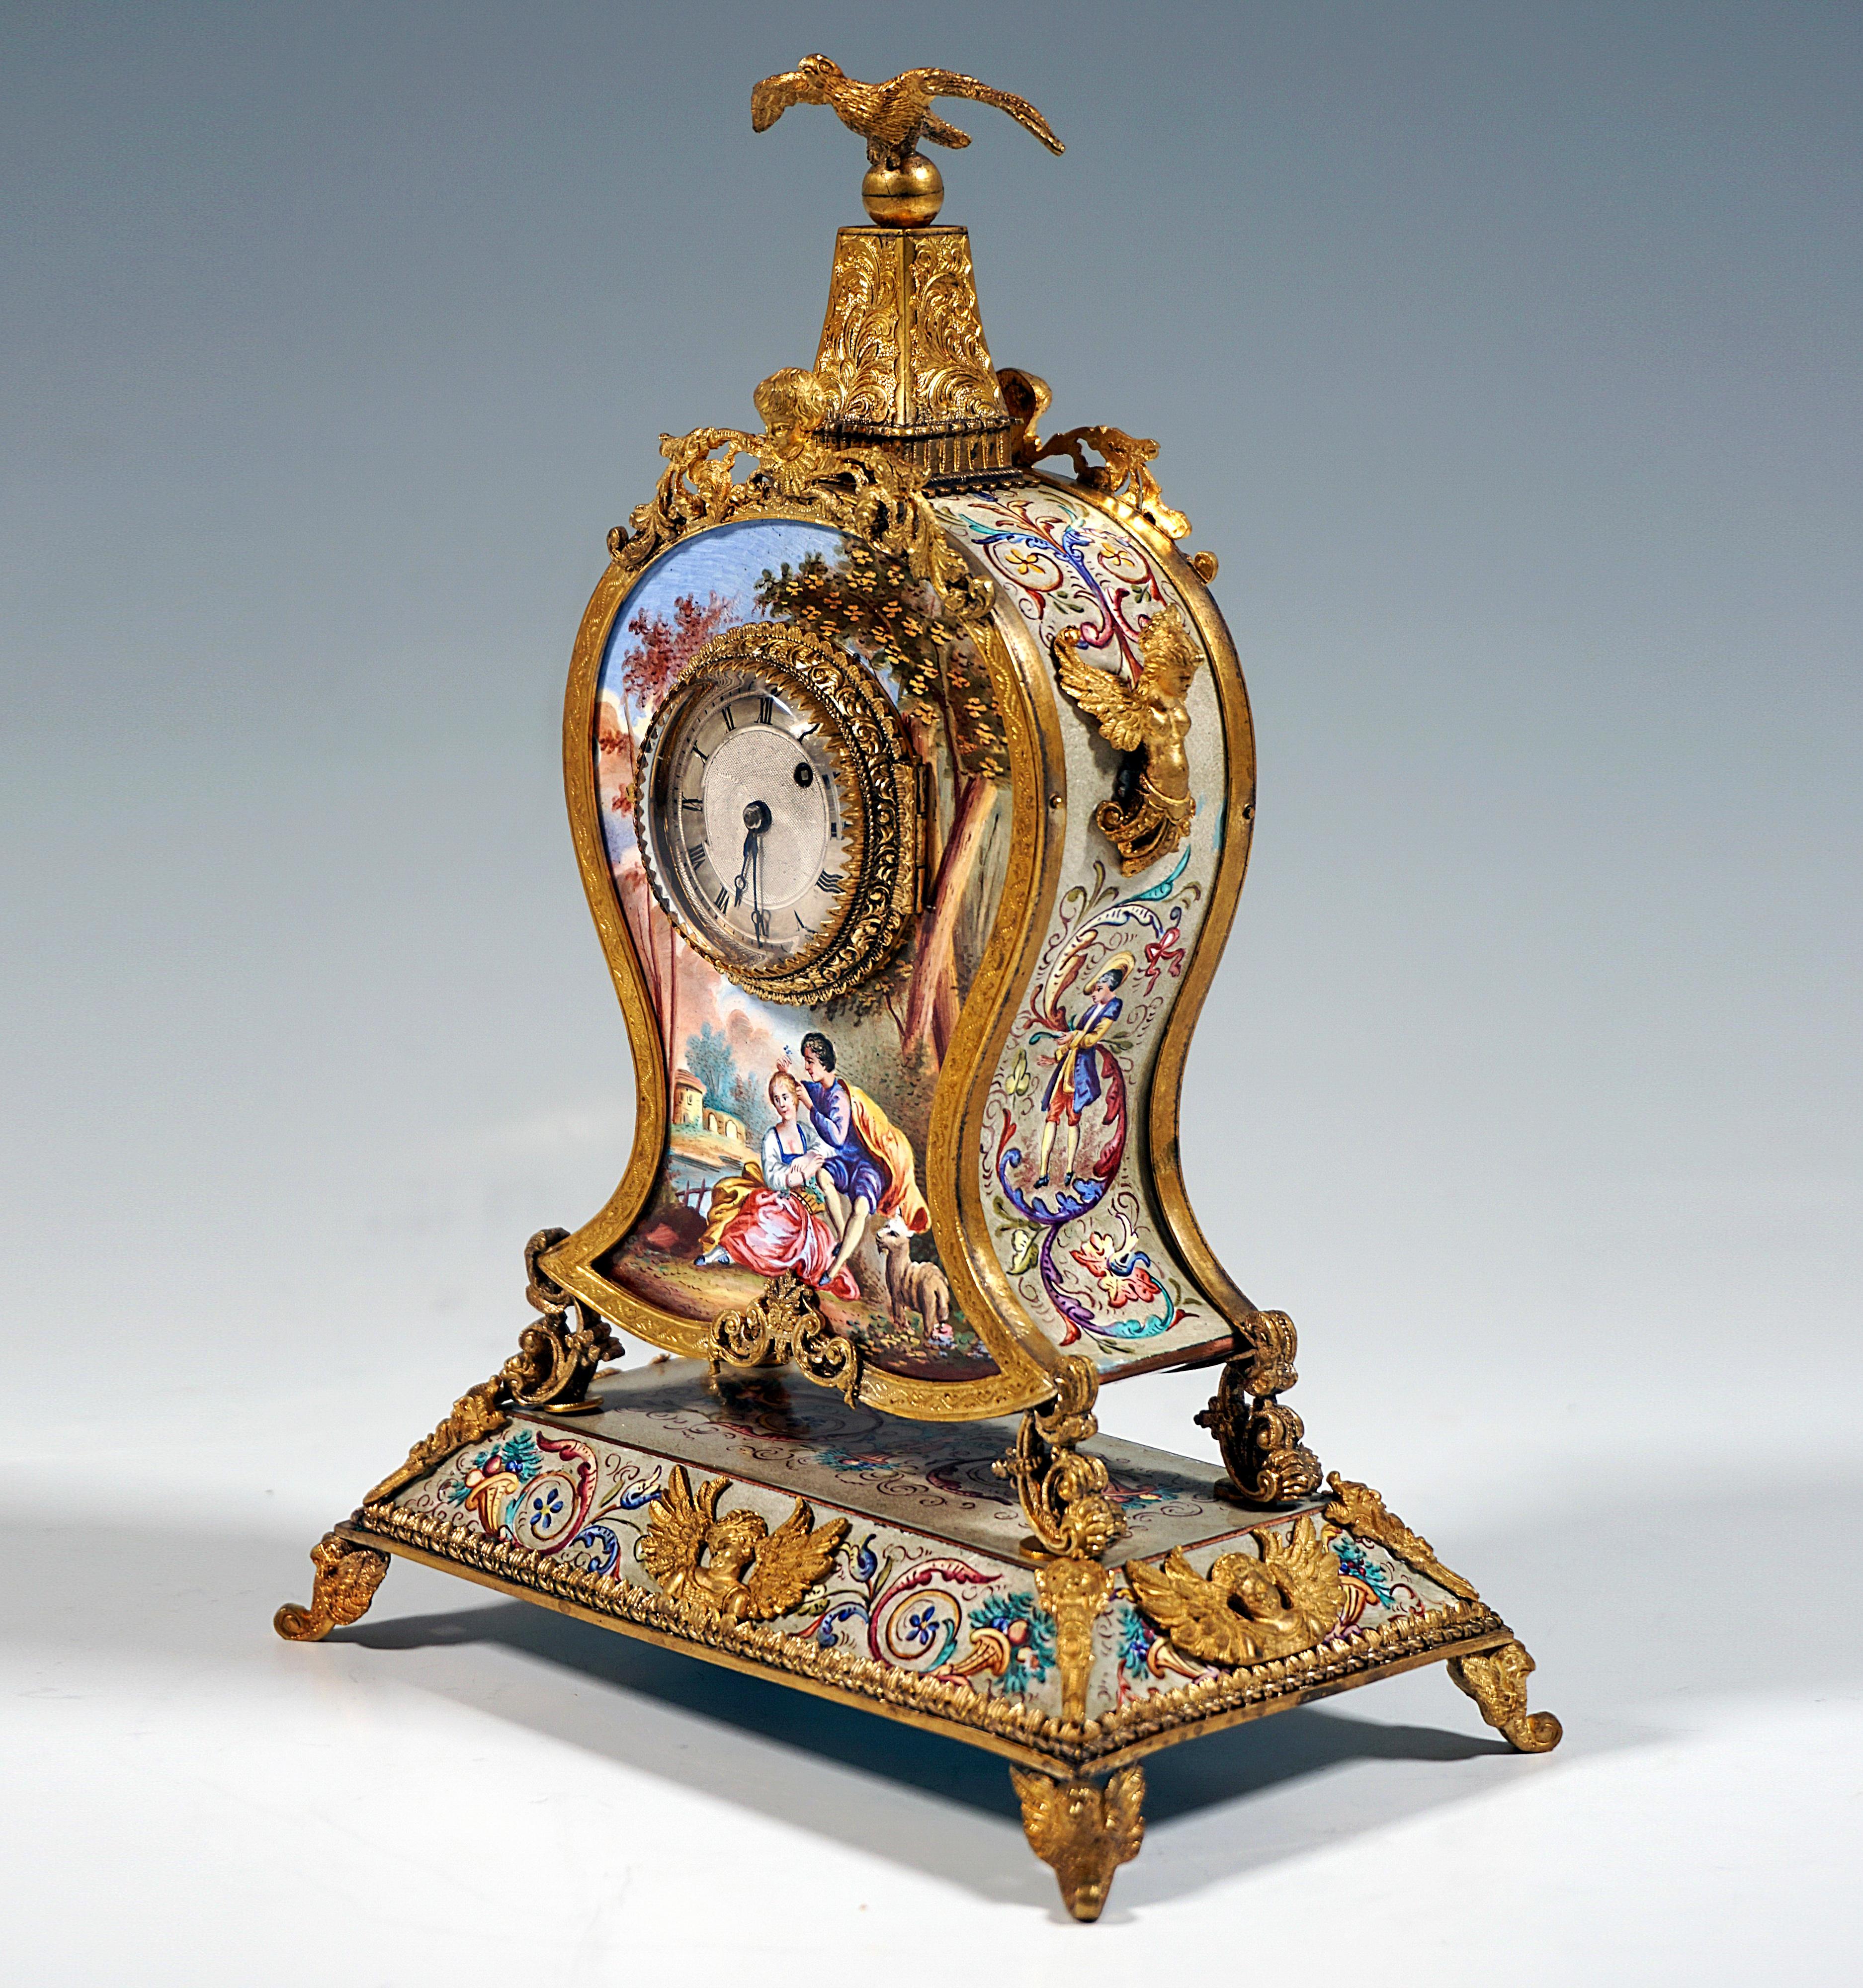 Other  Viennese Gilt Silver & Enamel Table Clock With Gallant Scenes Painting, Ca 1880